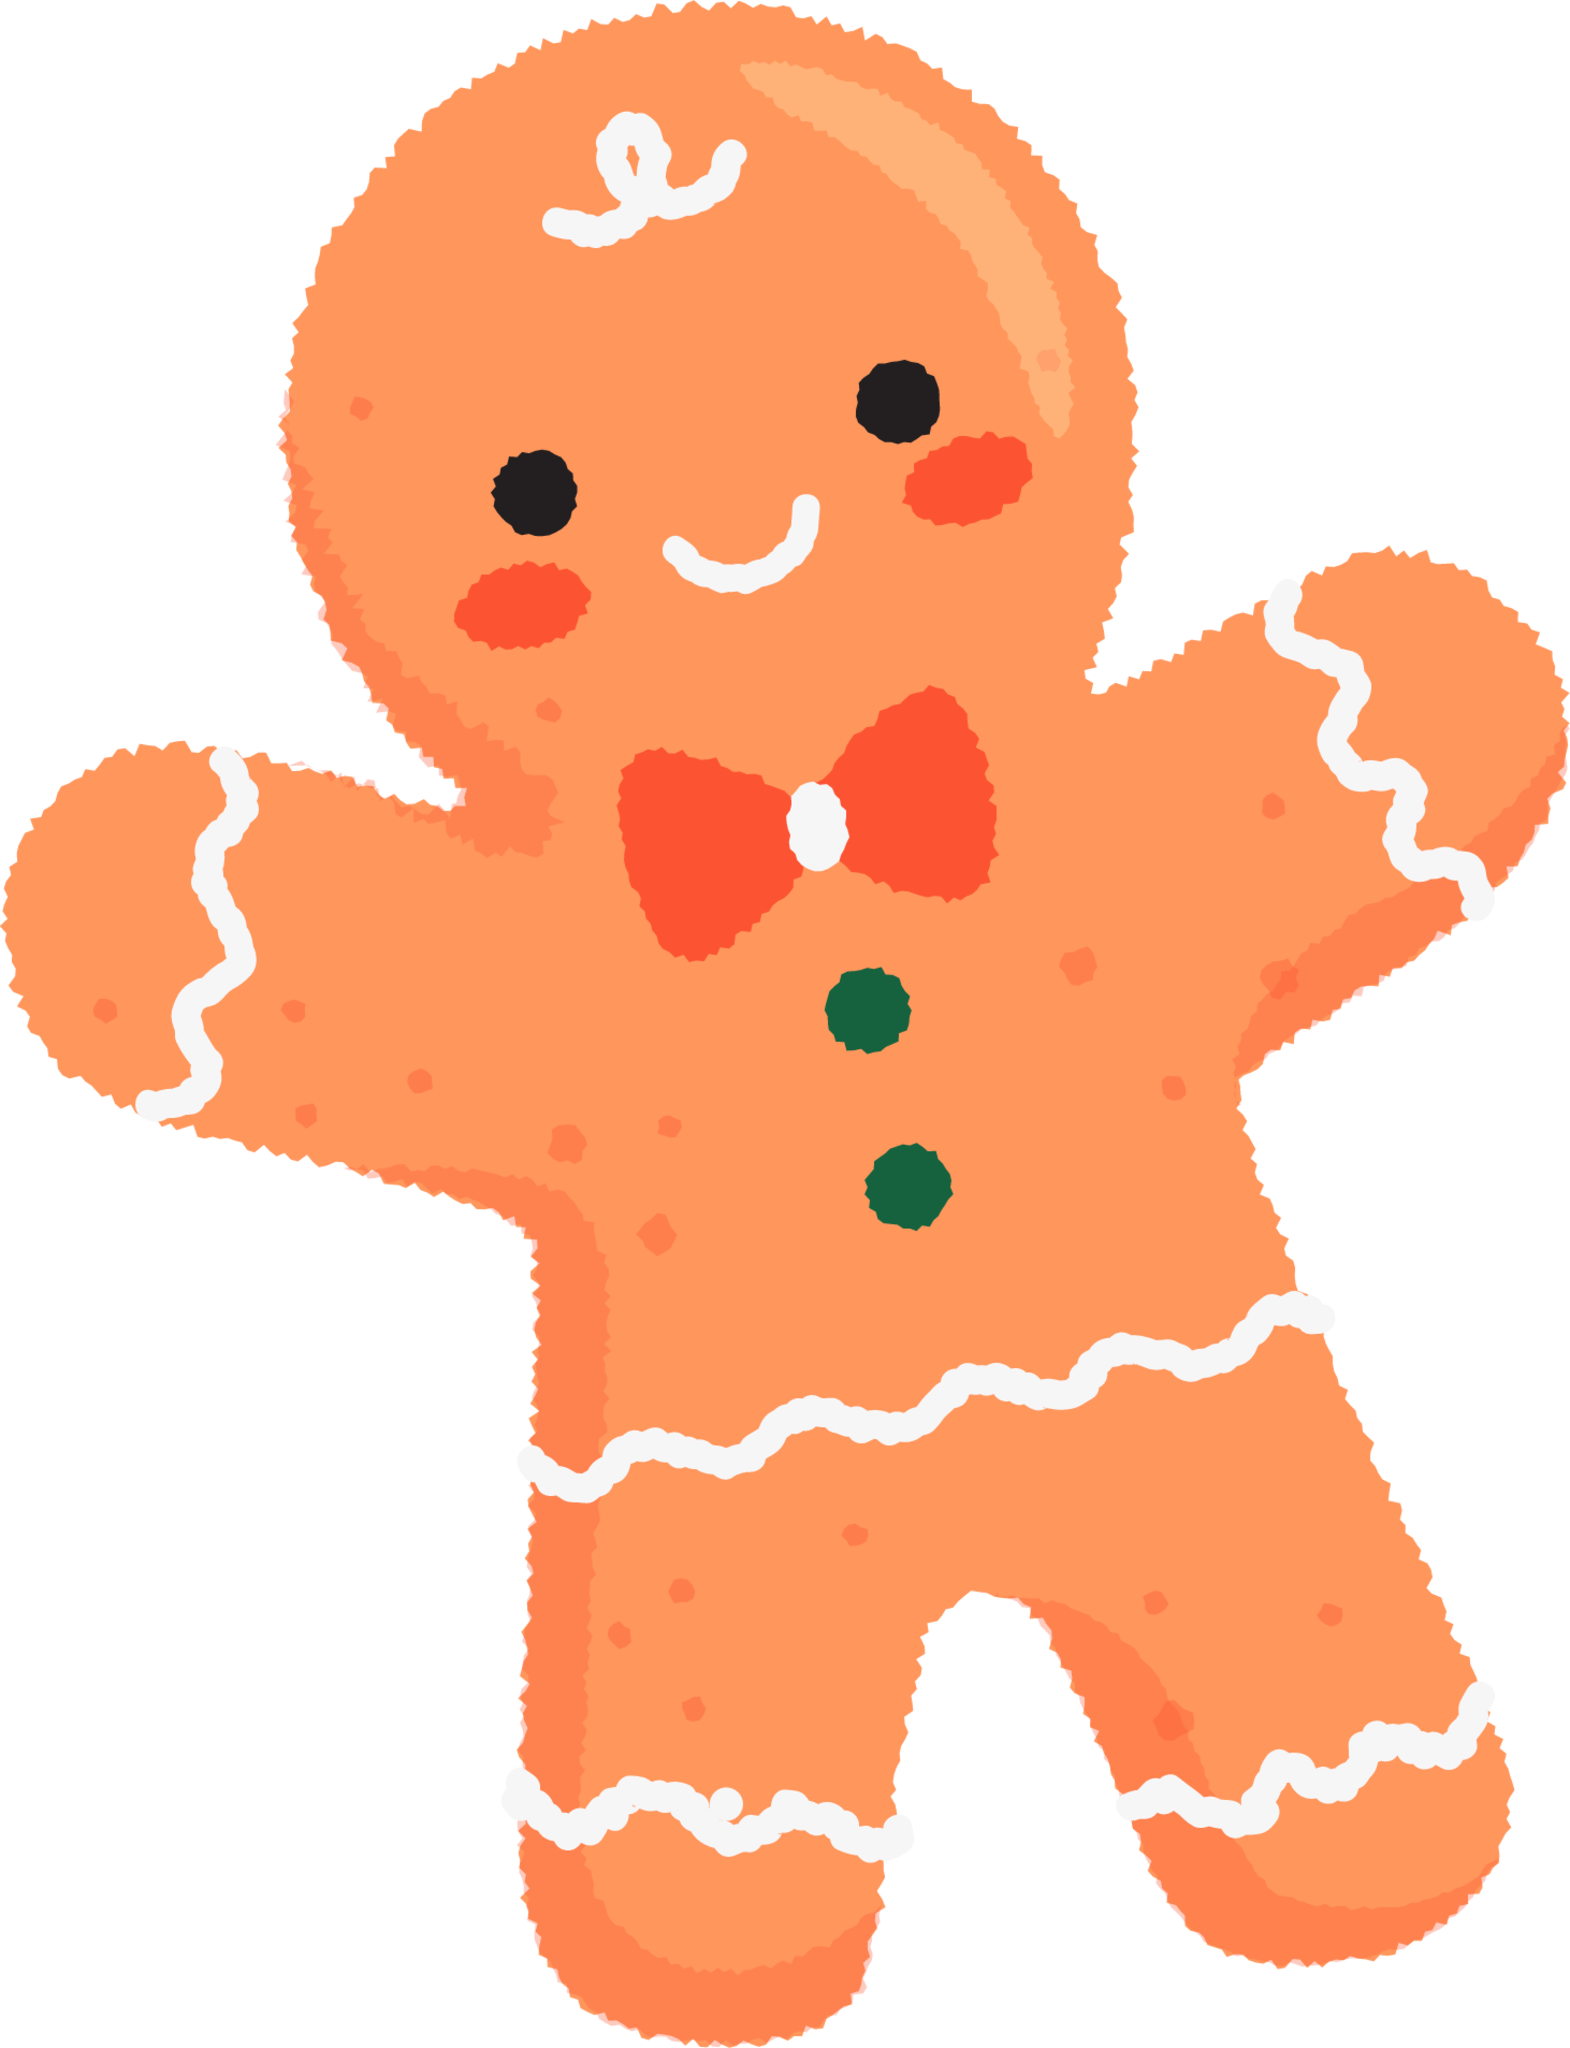 Gingerbread PNG Image HD